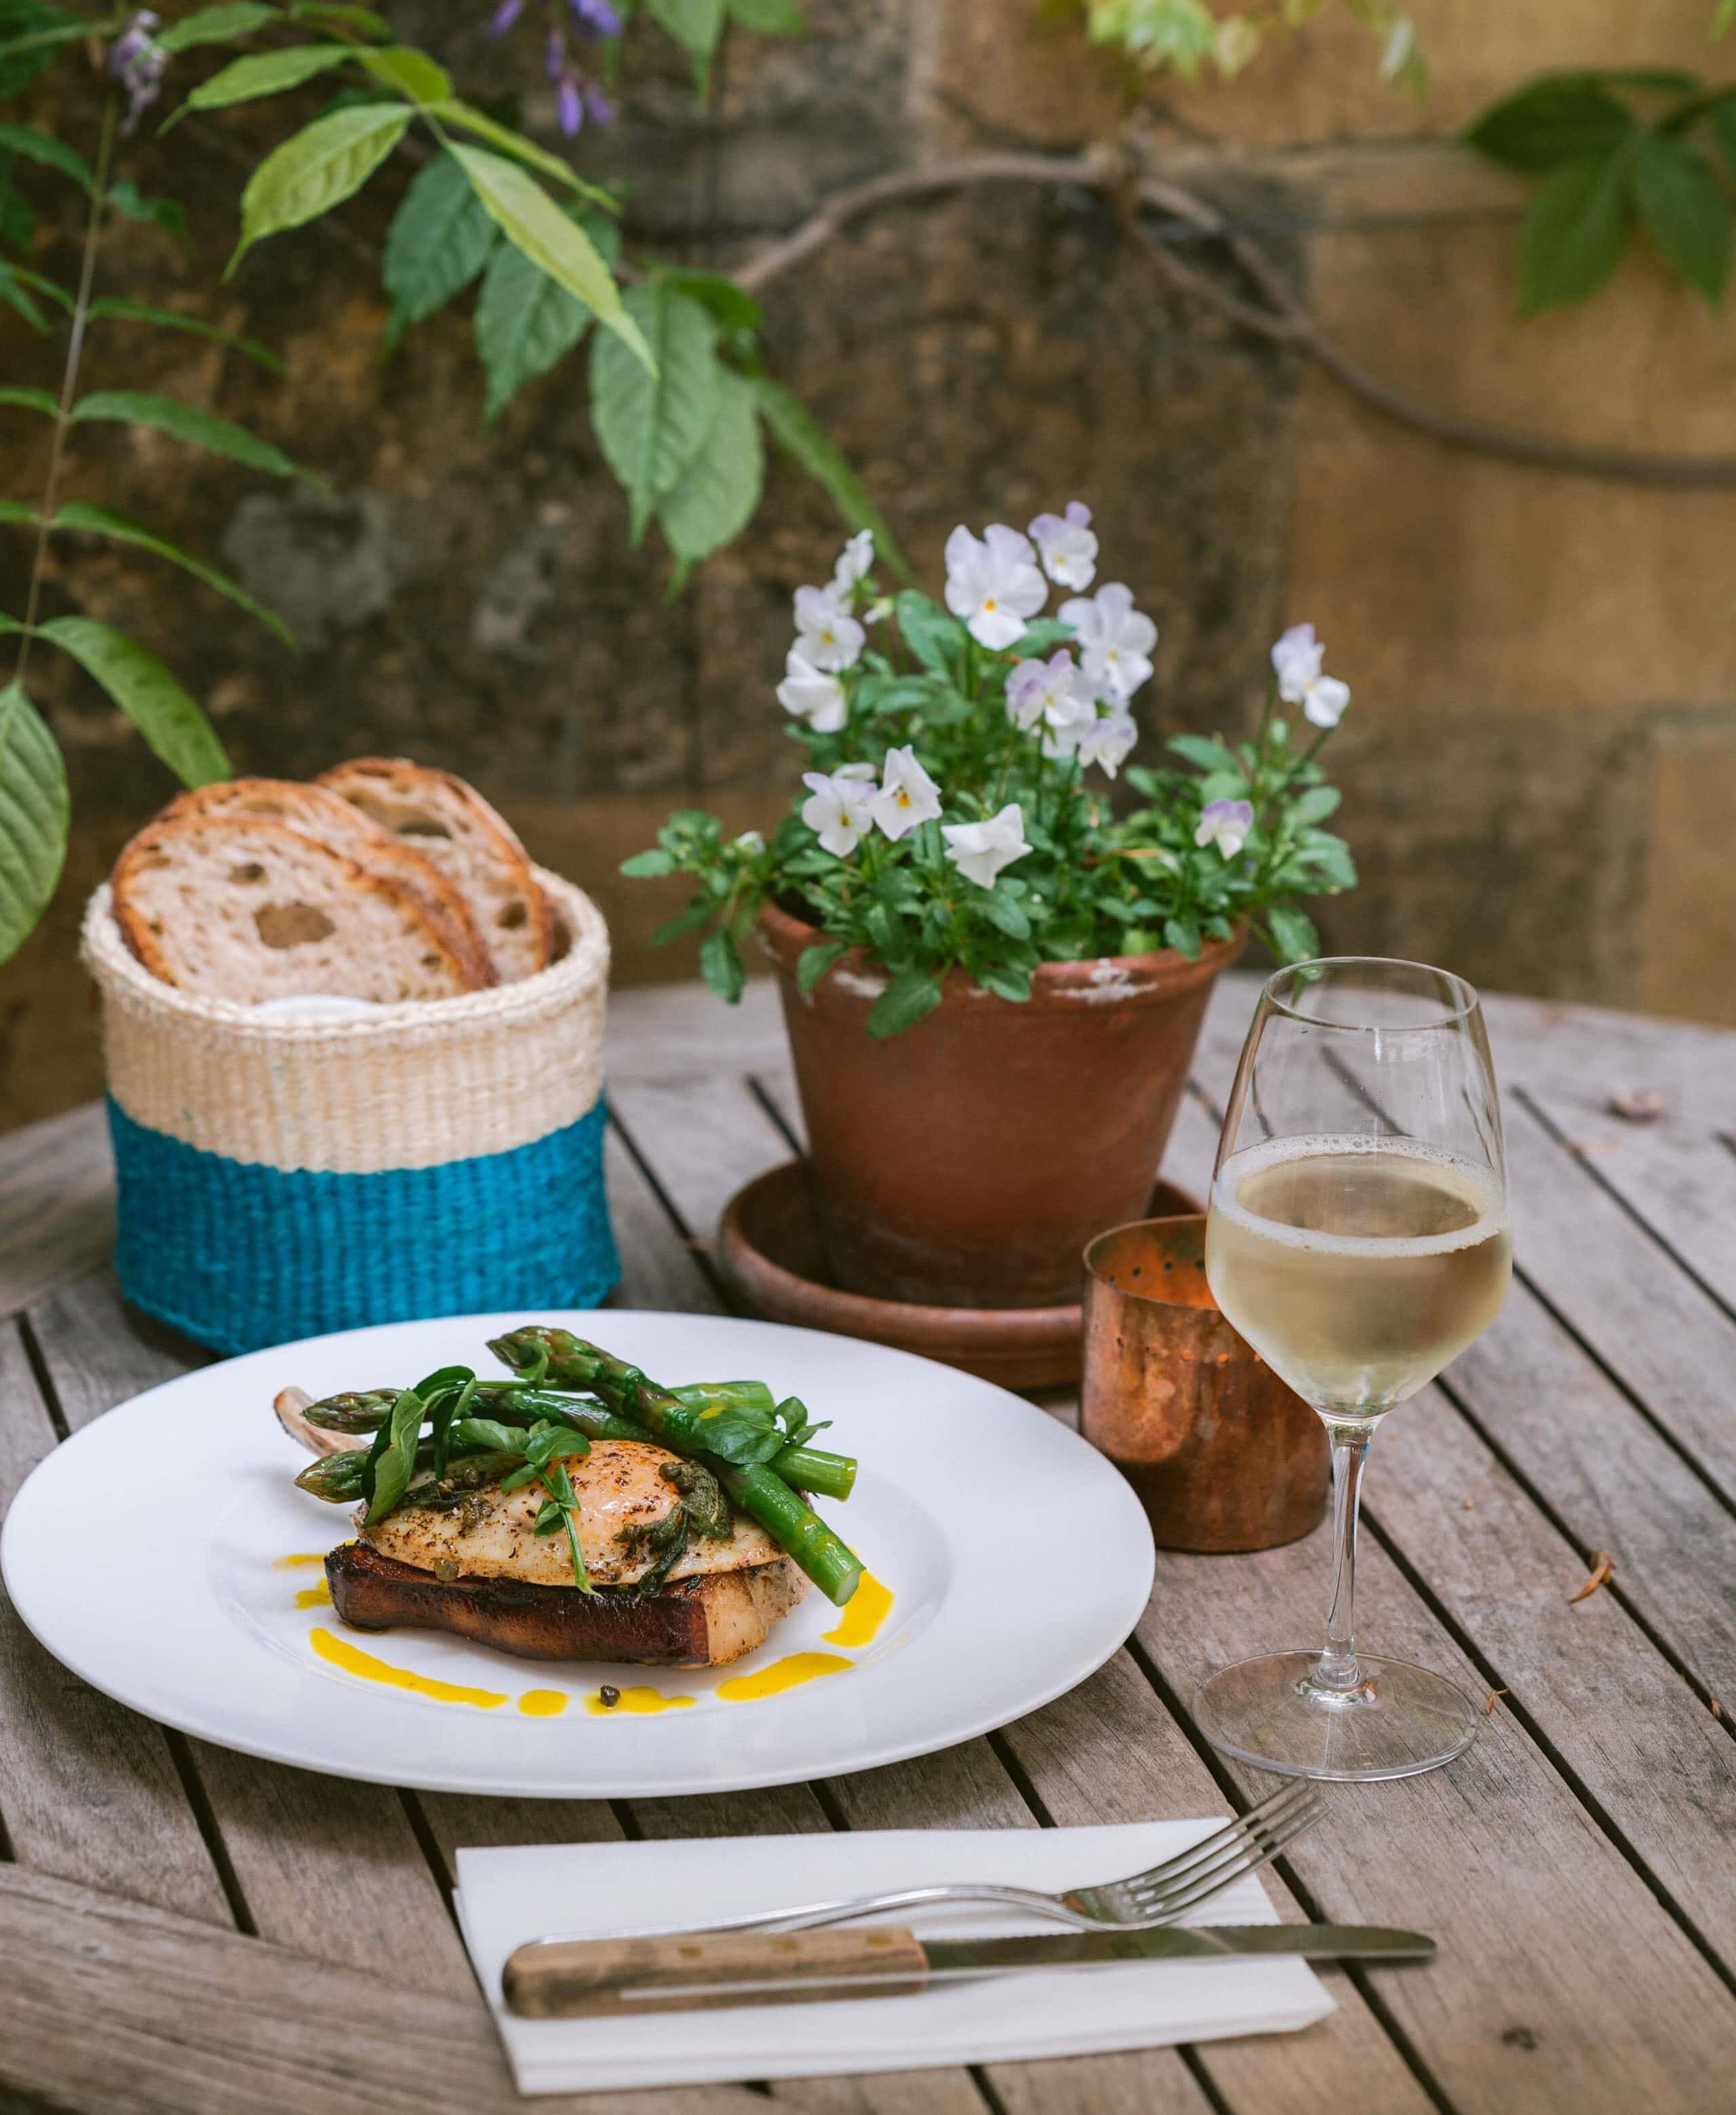 0061-2022-Parsonage-Grill-Oxford-High-Res-Outdoor-Dining-Pork-Cutlet-White-Wine-Bread-Wisteria-Web-Hero-aspect-ratio-2560-3118